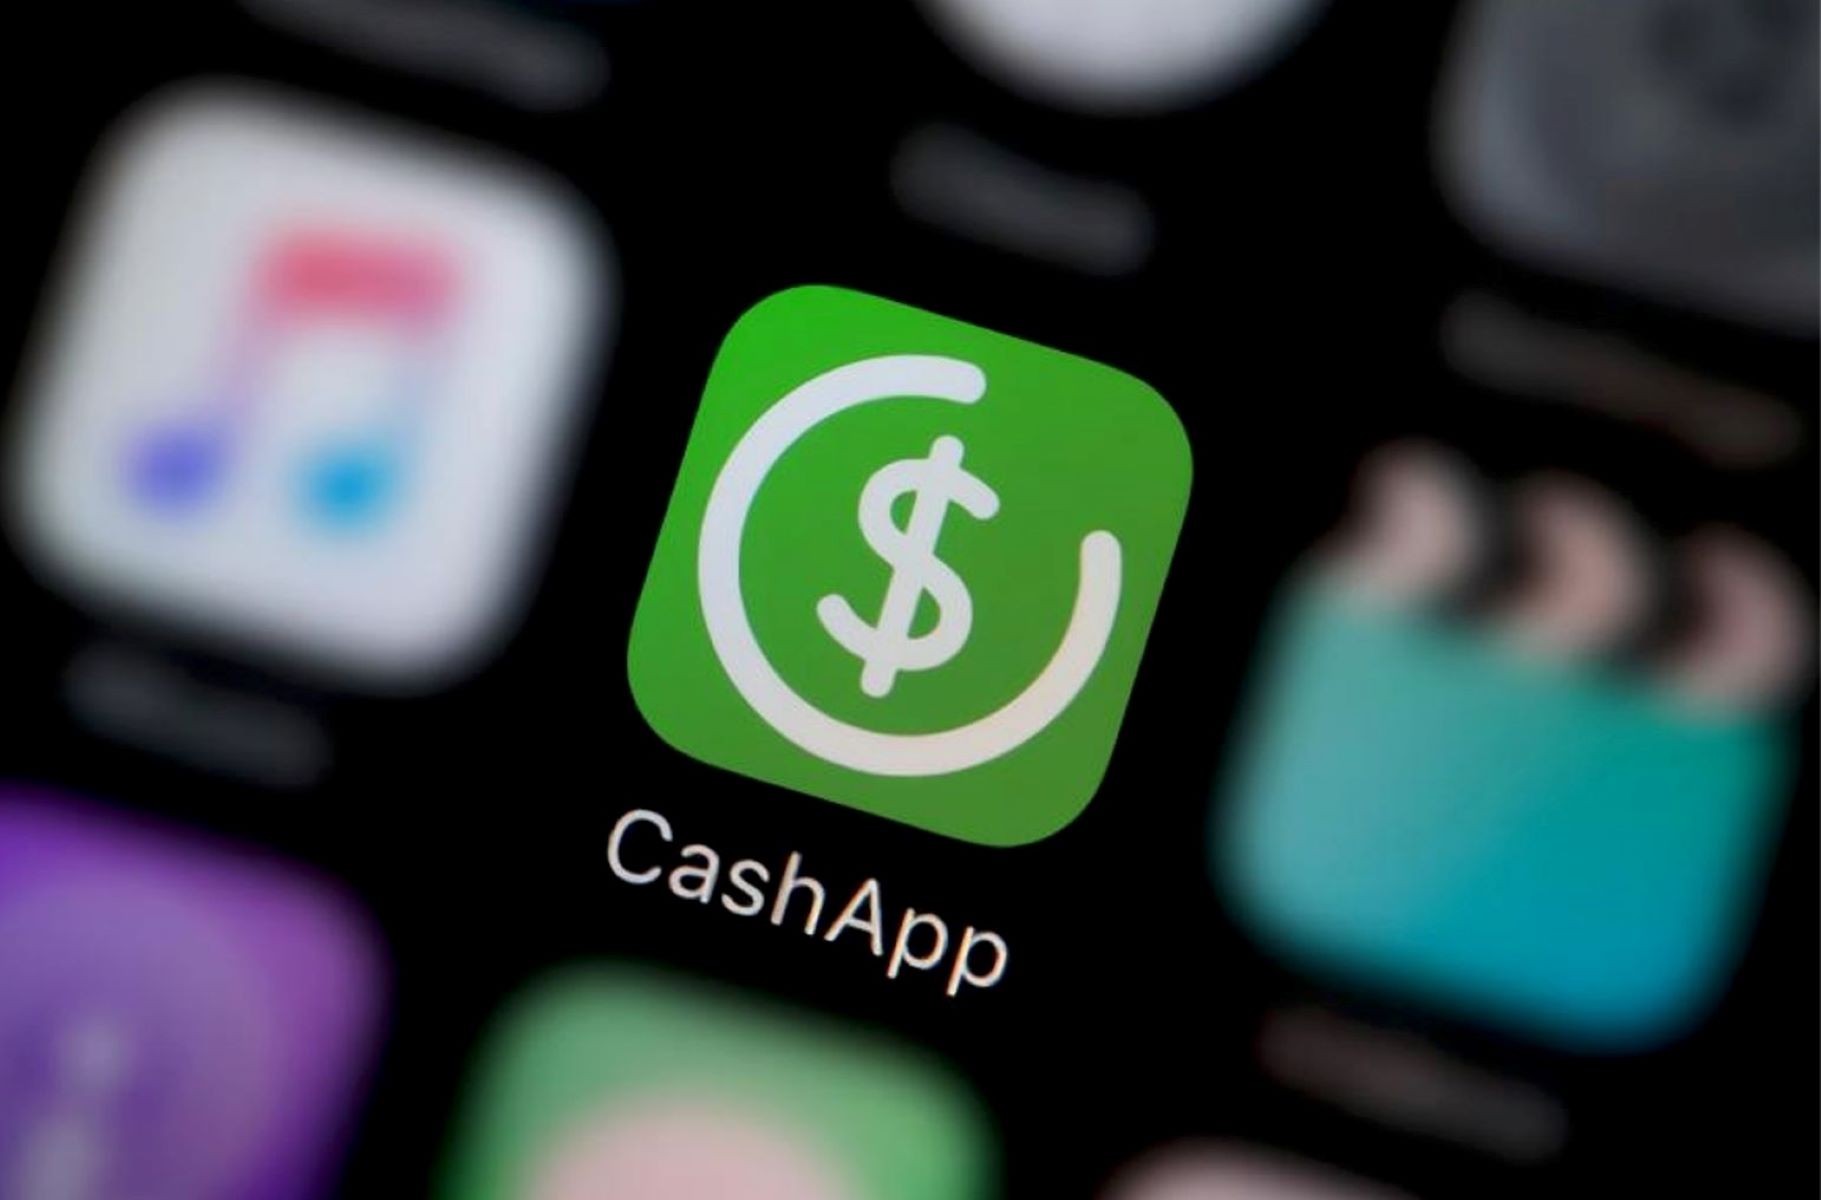 how-to-access-cash-app-without-phone-number-or-email